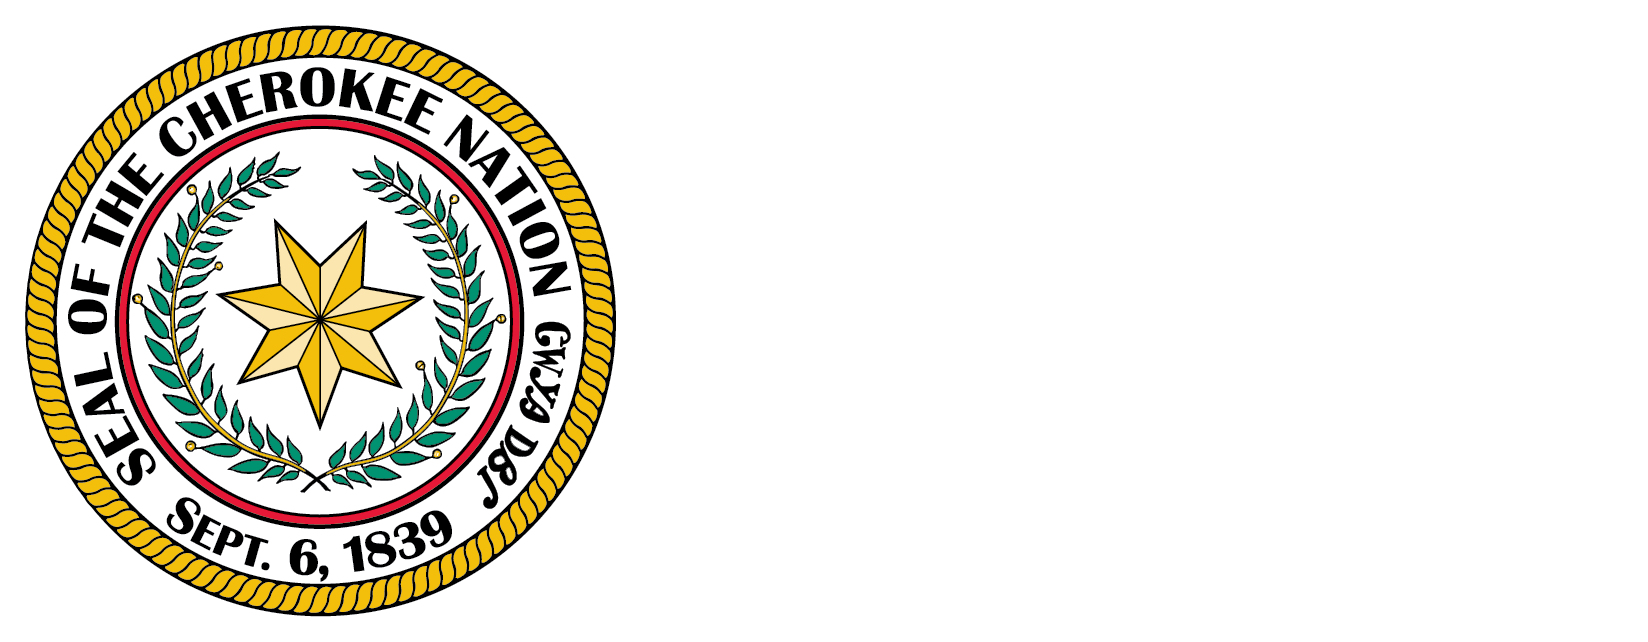 Seal of the Cherokee Nation - Image of person and child on bridge